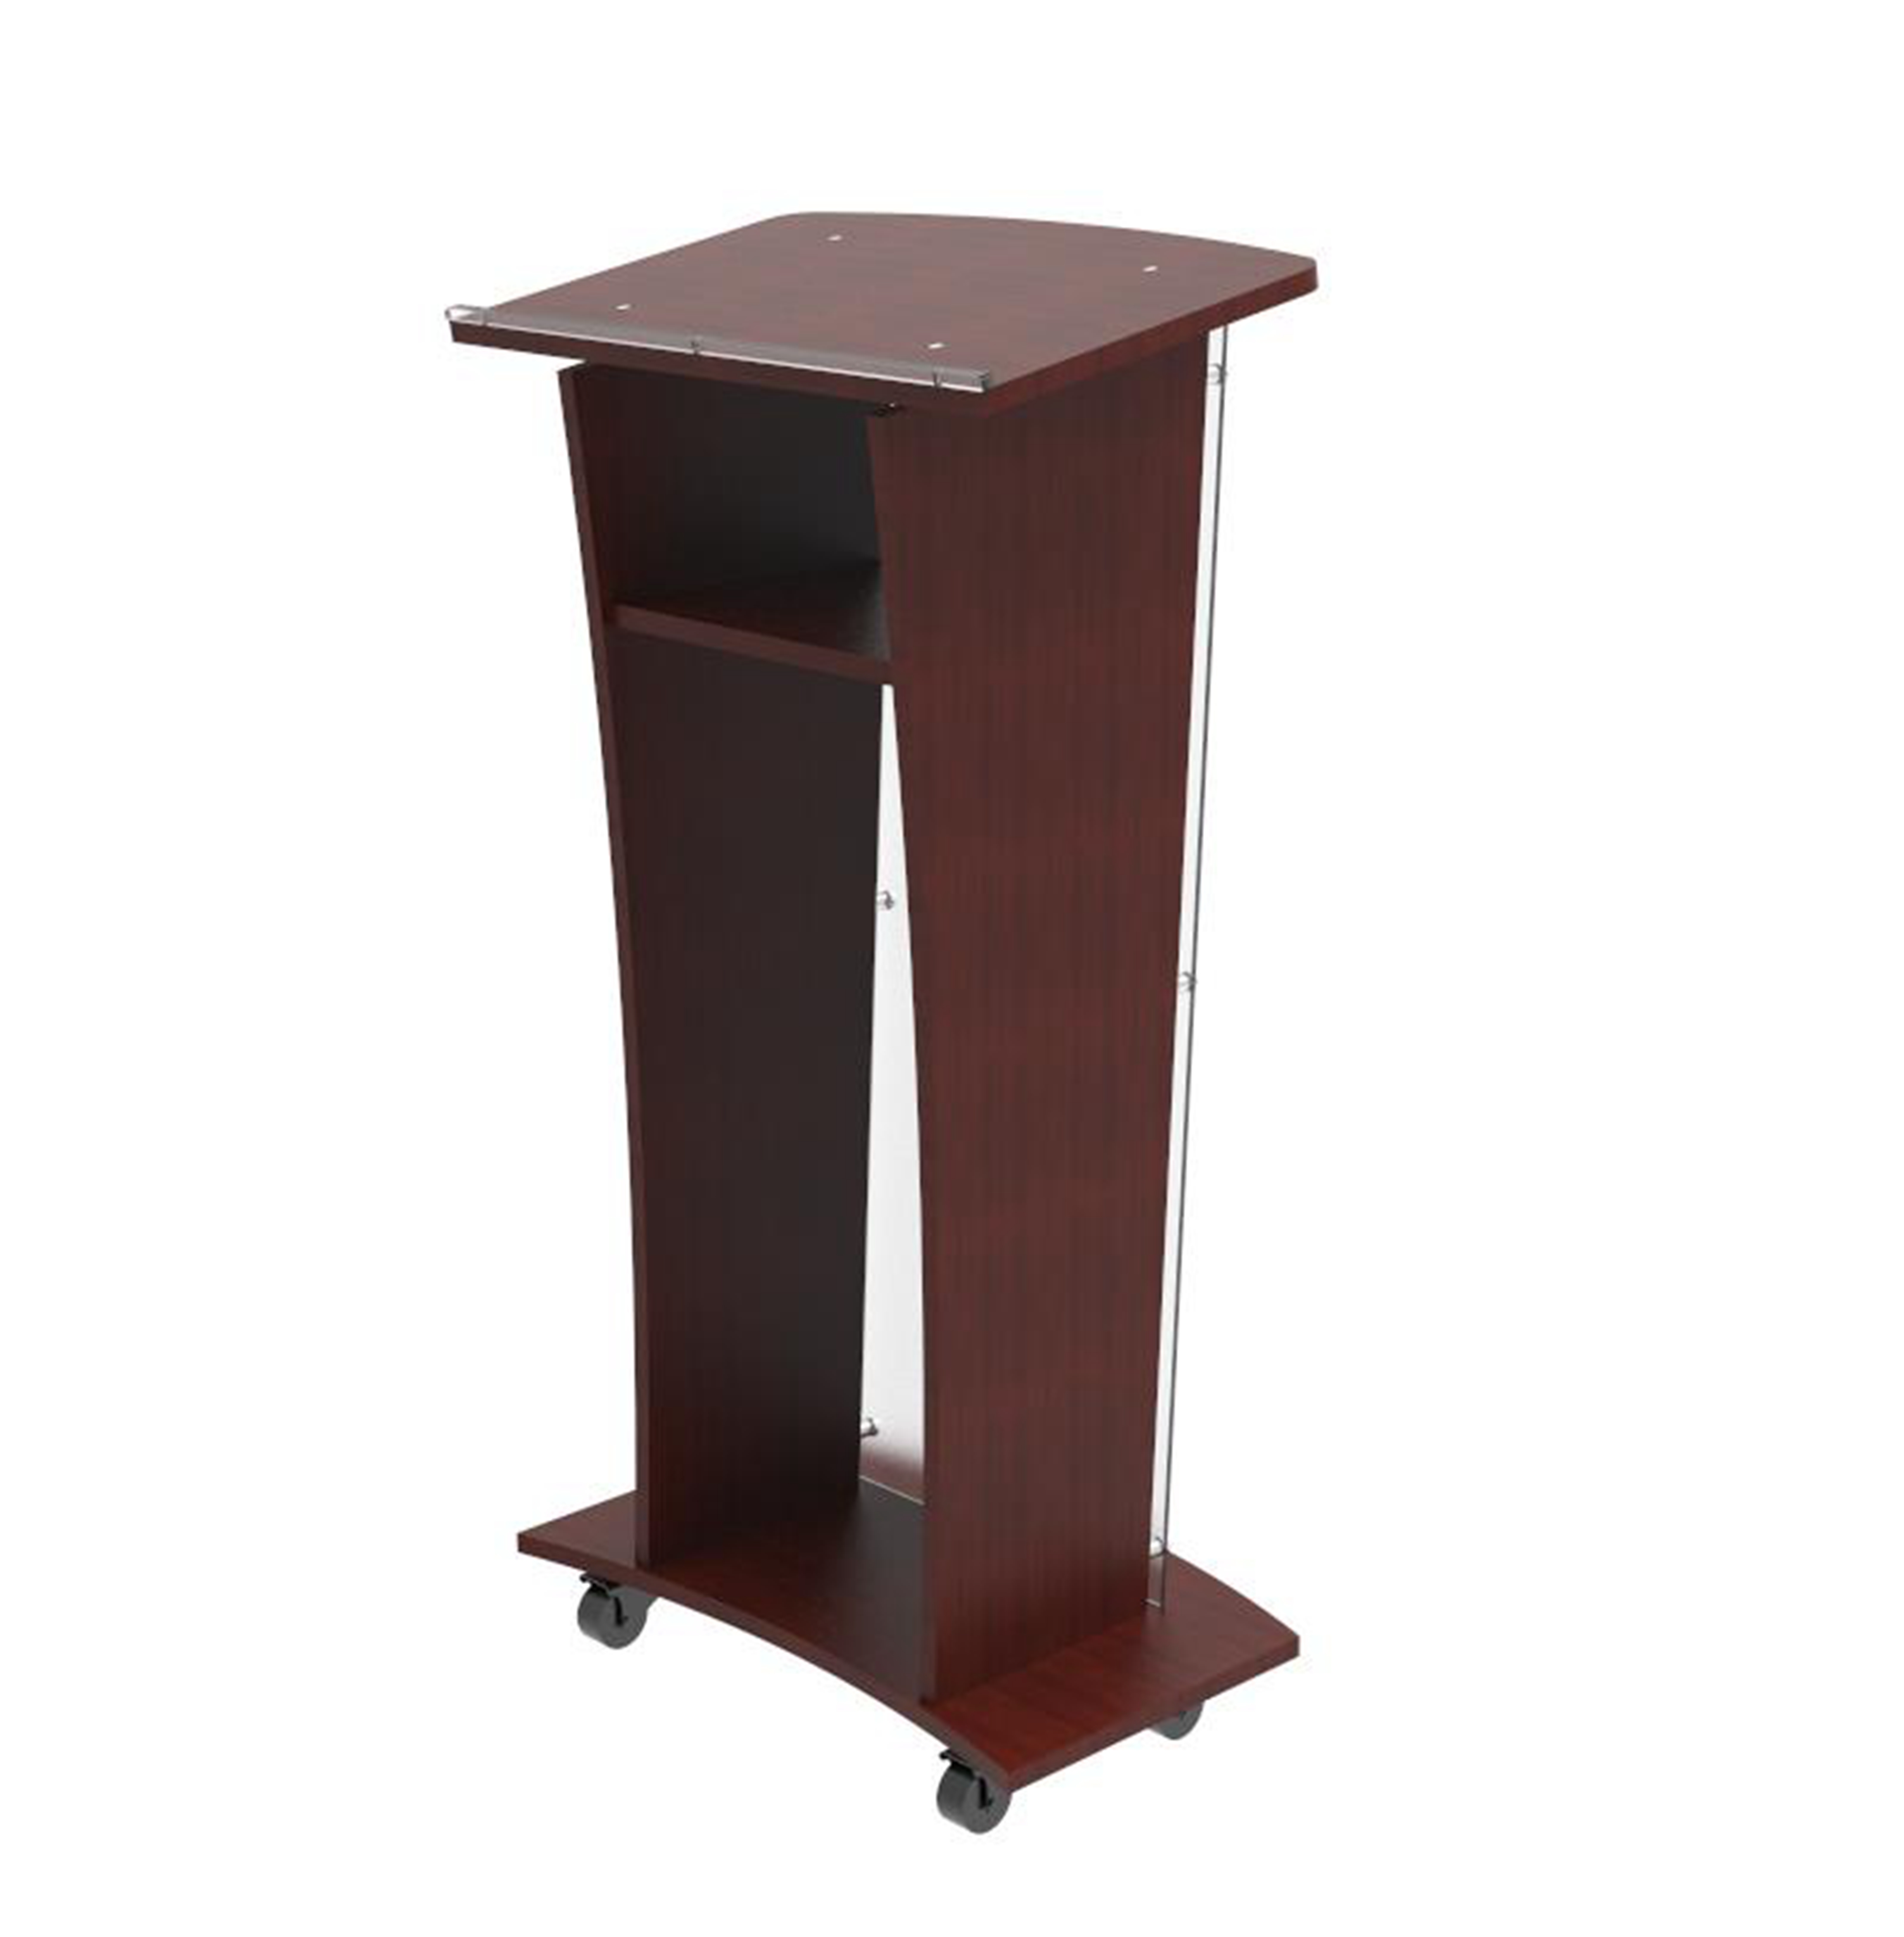 FixtureDisplays Wood Podium with Frost Acrylic Front Panel, 48" tall Pulpit Lectern 1803-5